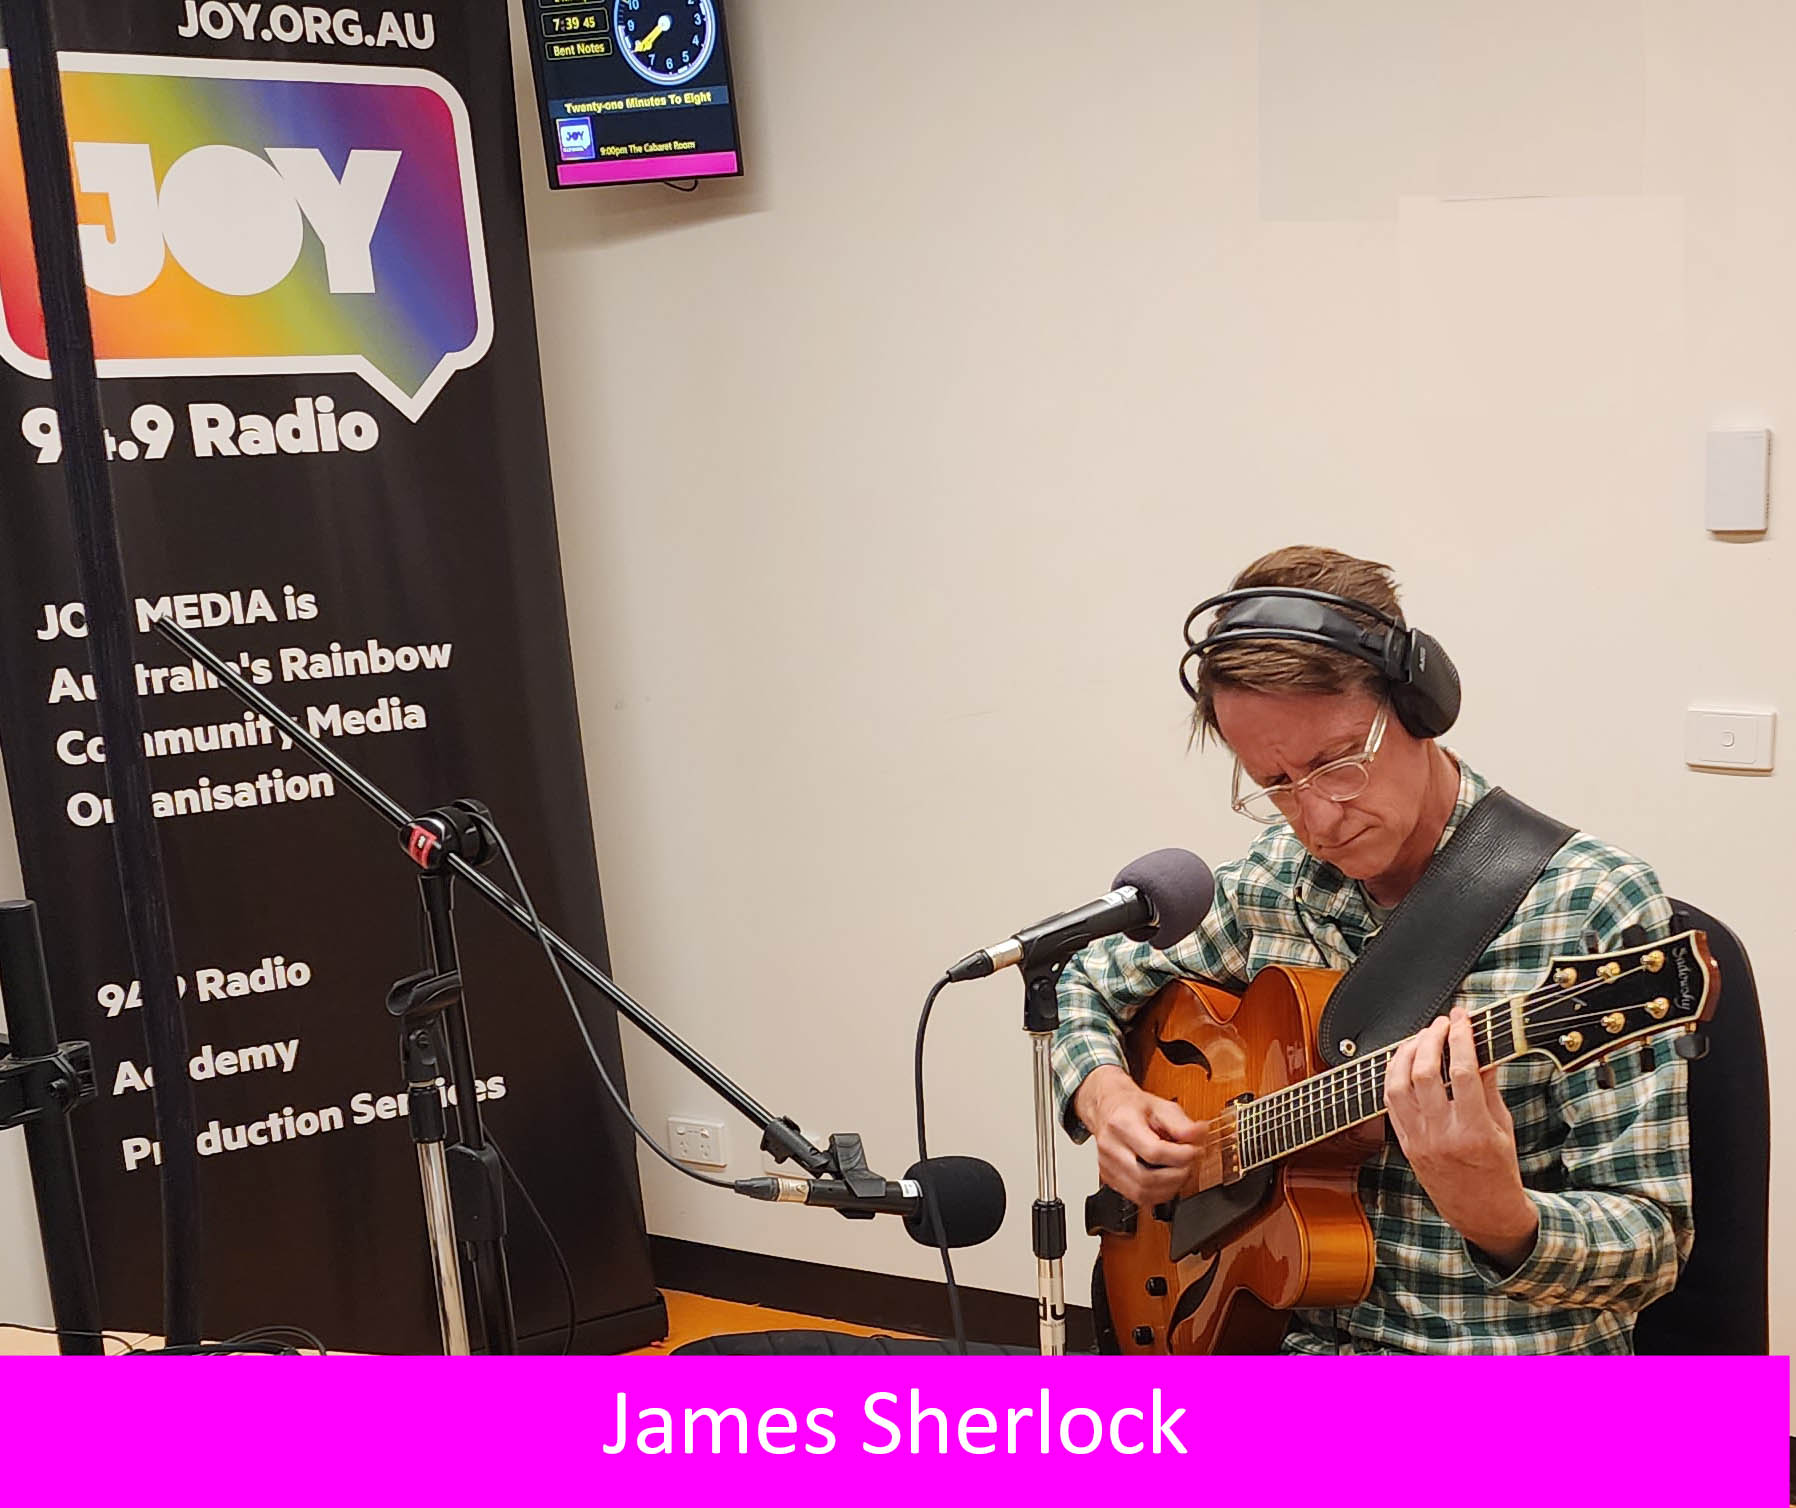 James’ Music is Active – it is the Verb